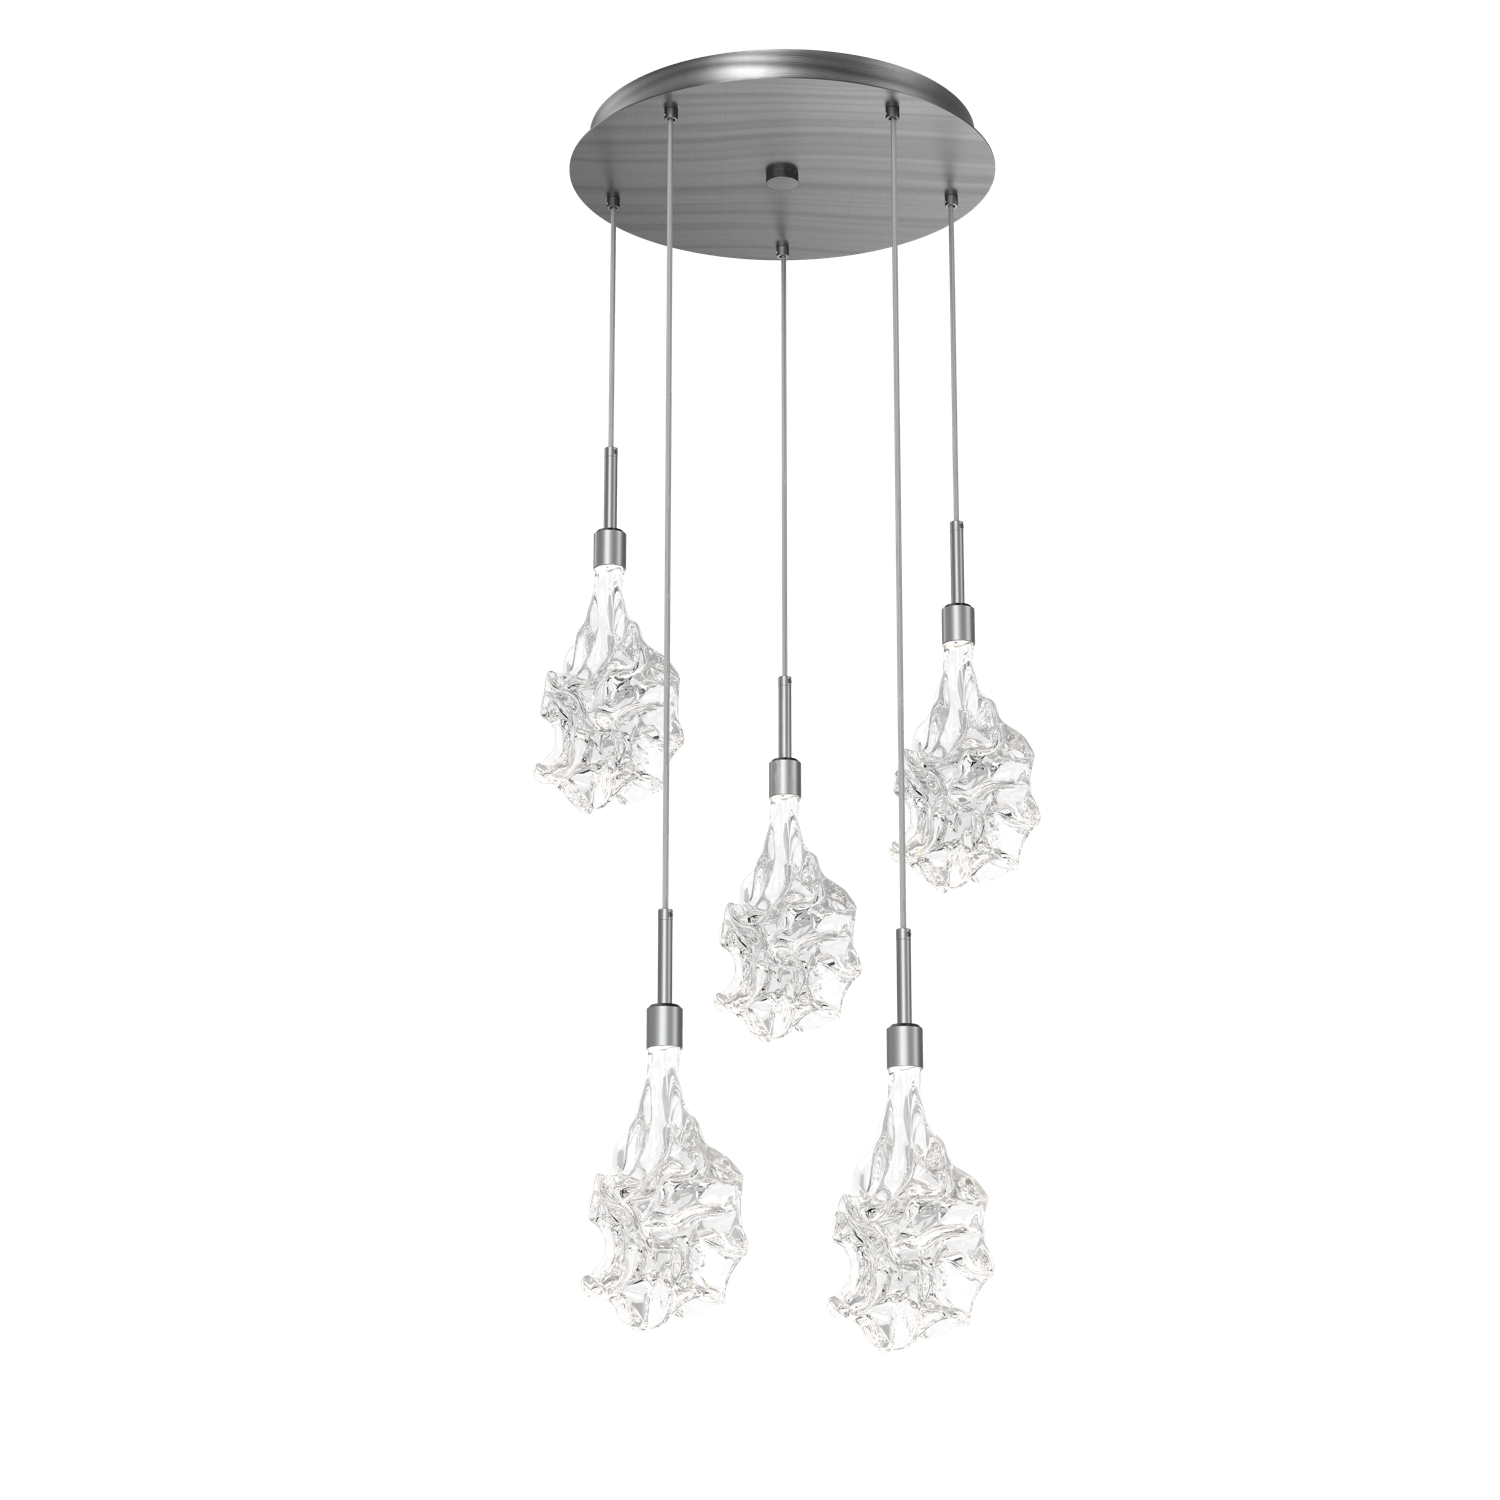 CHB0059-05-GM-Hammerton-Studio-Blossom-5-light-round-pendant-chandelier-with-gunmetal-finish-and-clear-handblown-crystal-glass-shades-and-LED-lamping